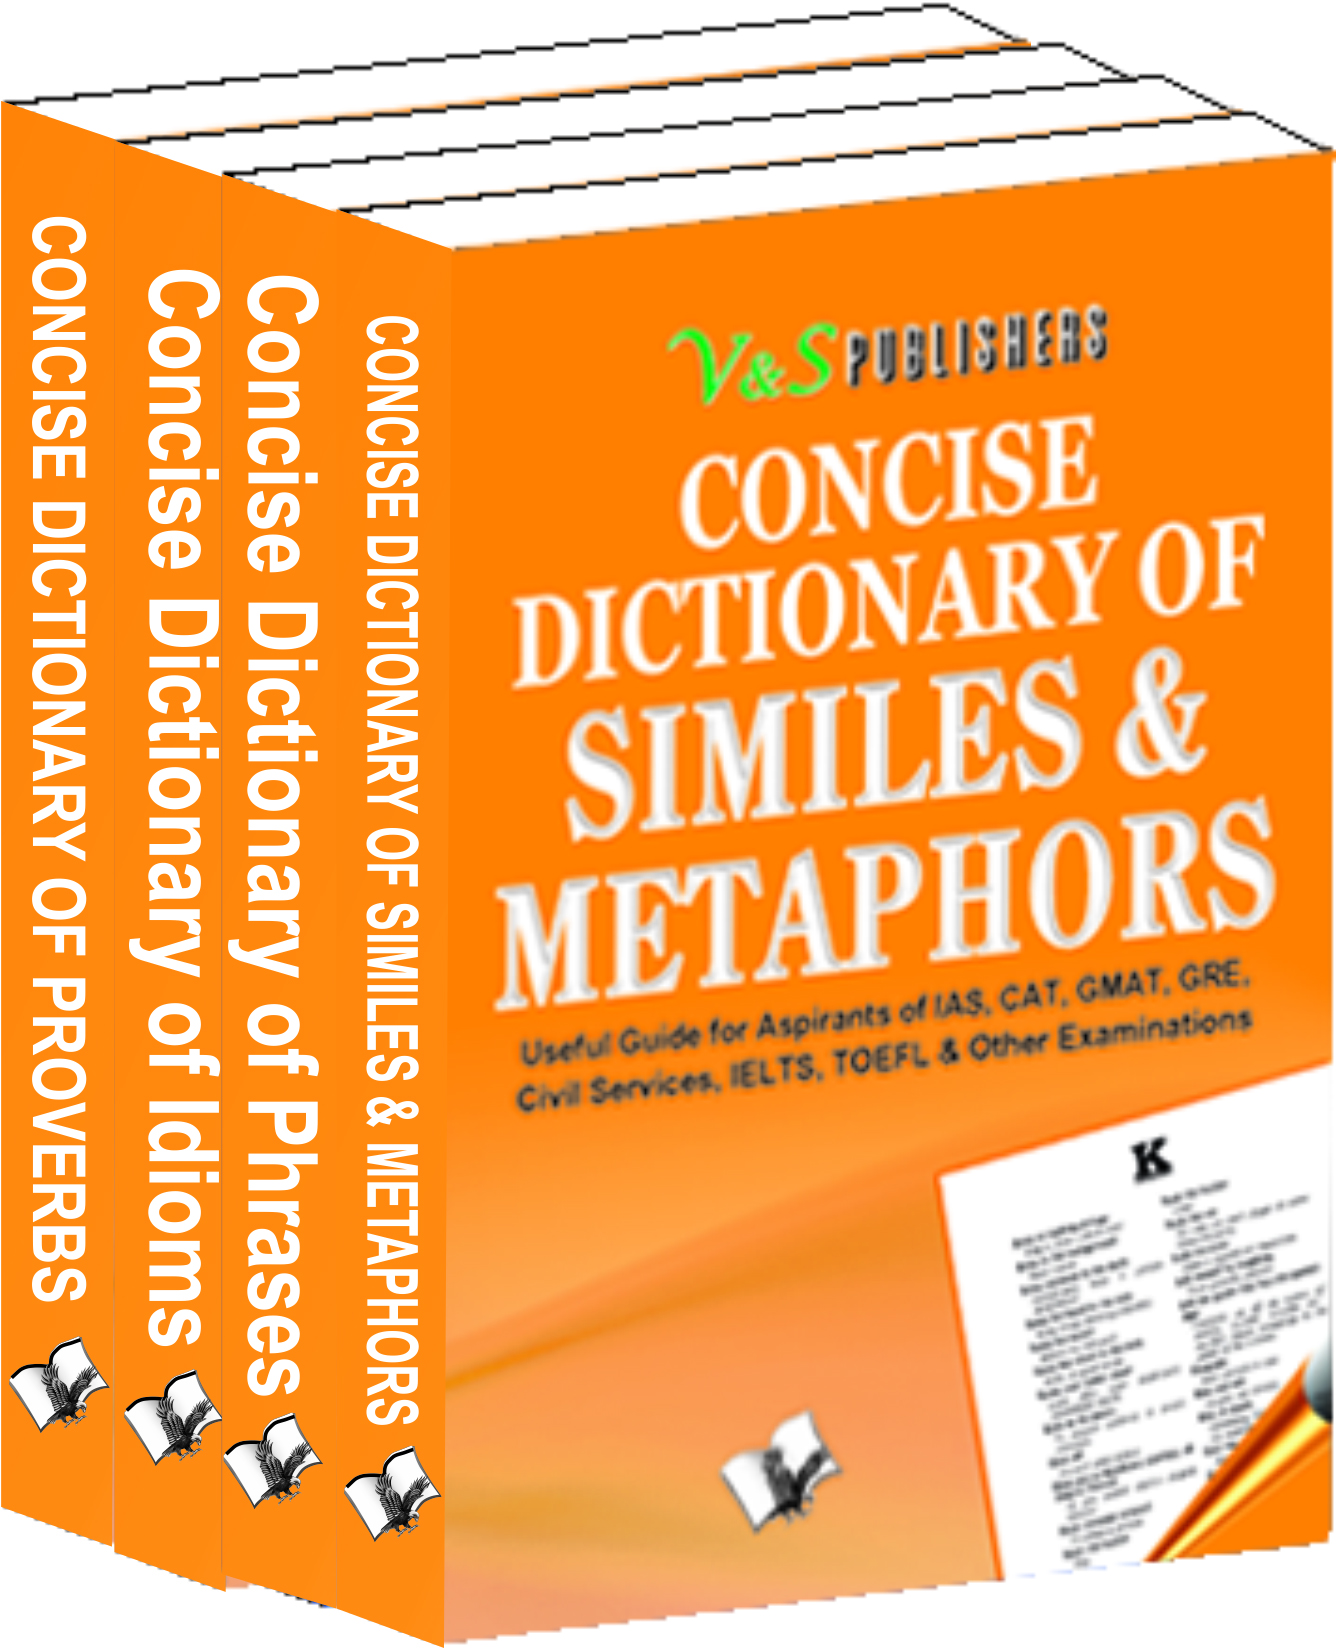 Concise Dictionary English Idioms, Proverbs, Phrases, Similies & Methaphors Value Pack-Effective use of Synonyms, Antonyms, Idioms, Proverbs, Phrases, Similes & Metaphors for writing impressive English